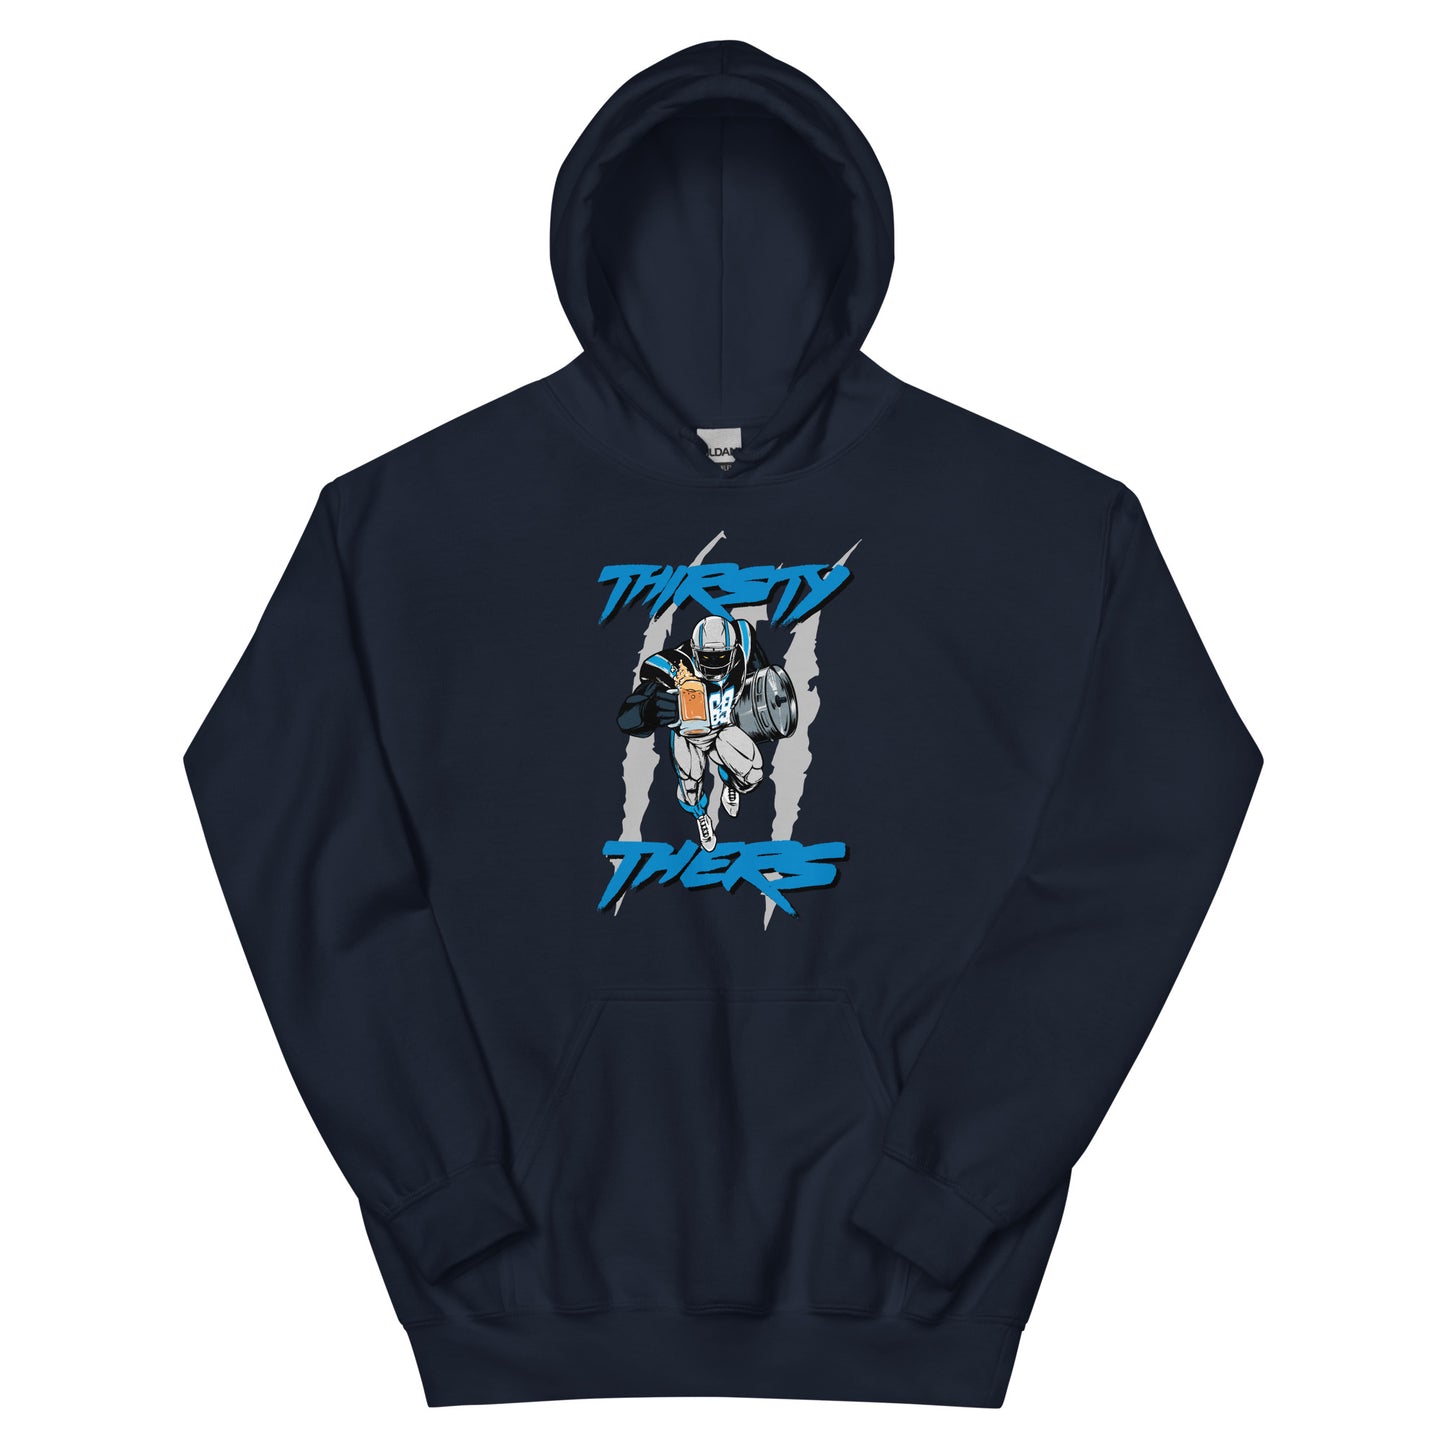 Thirsty Thers Hoodie